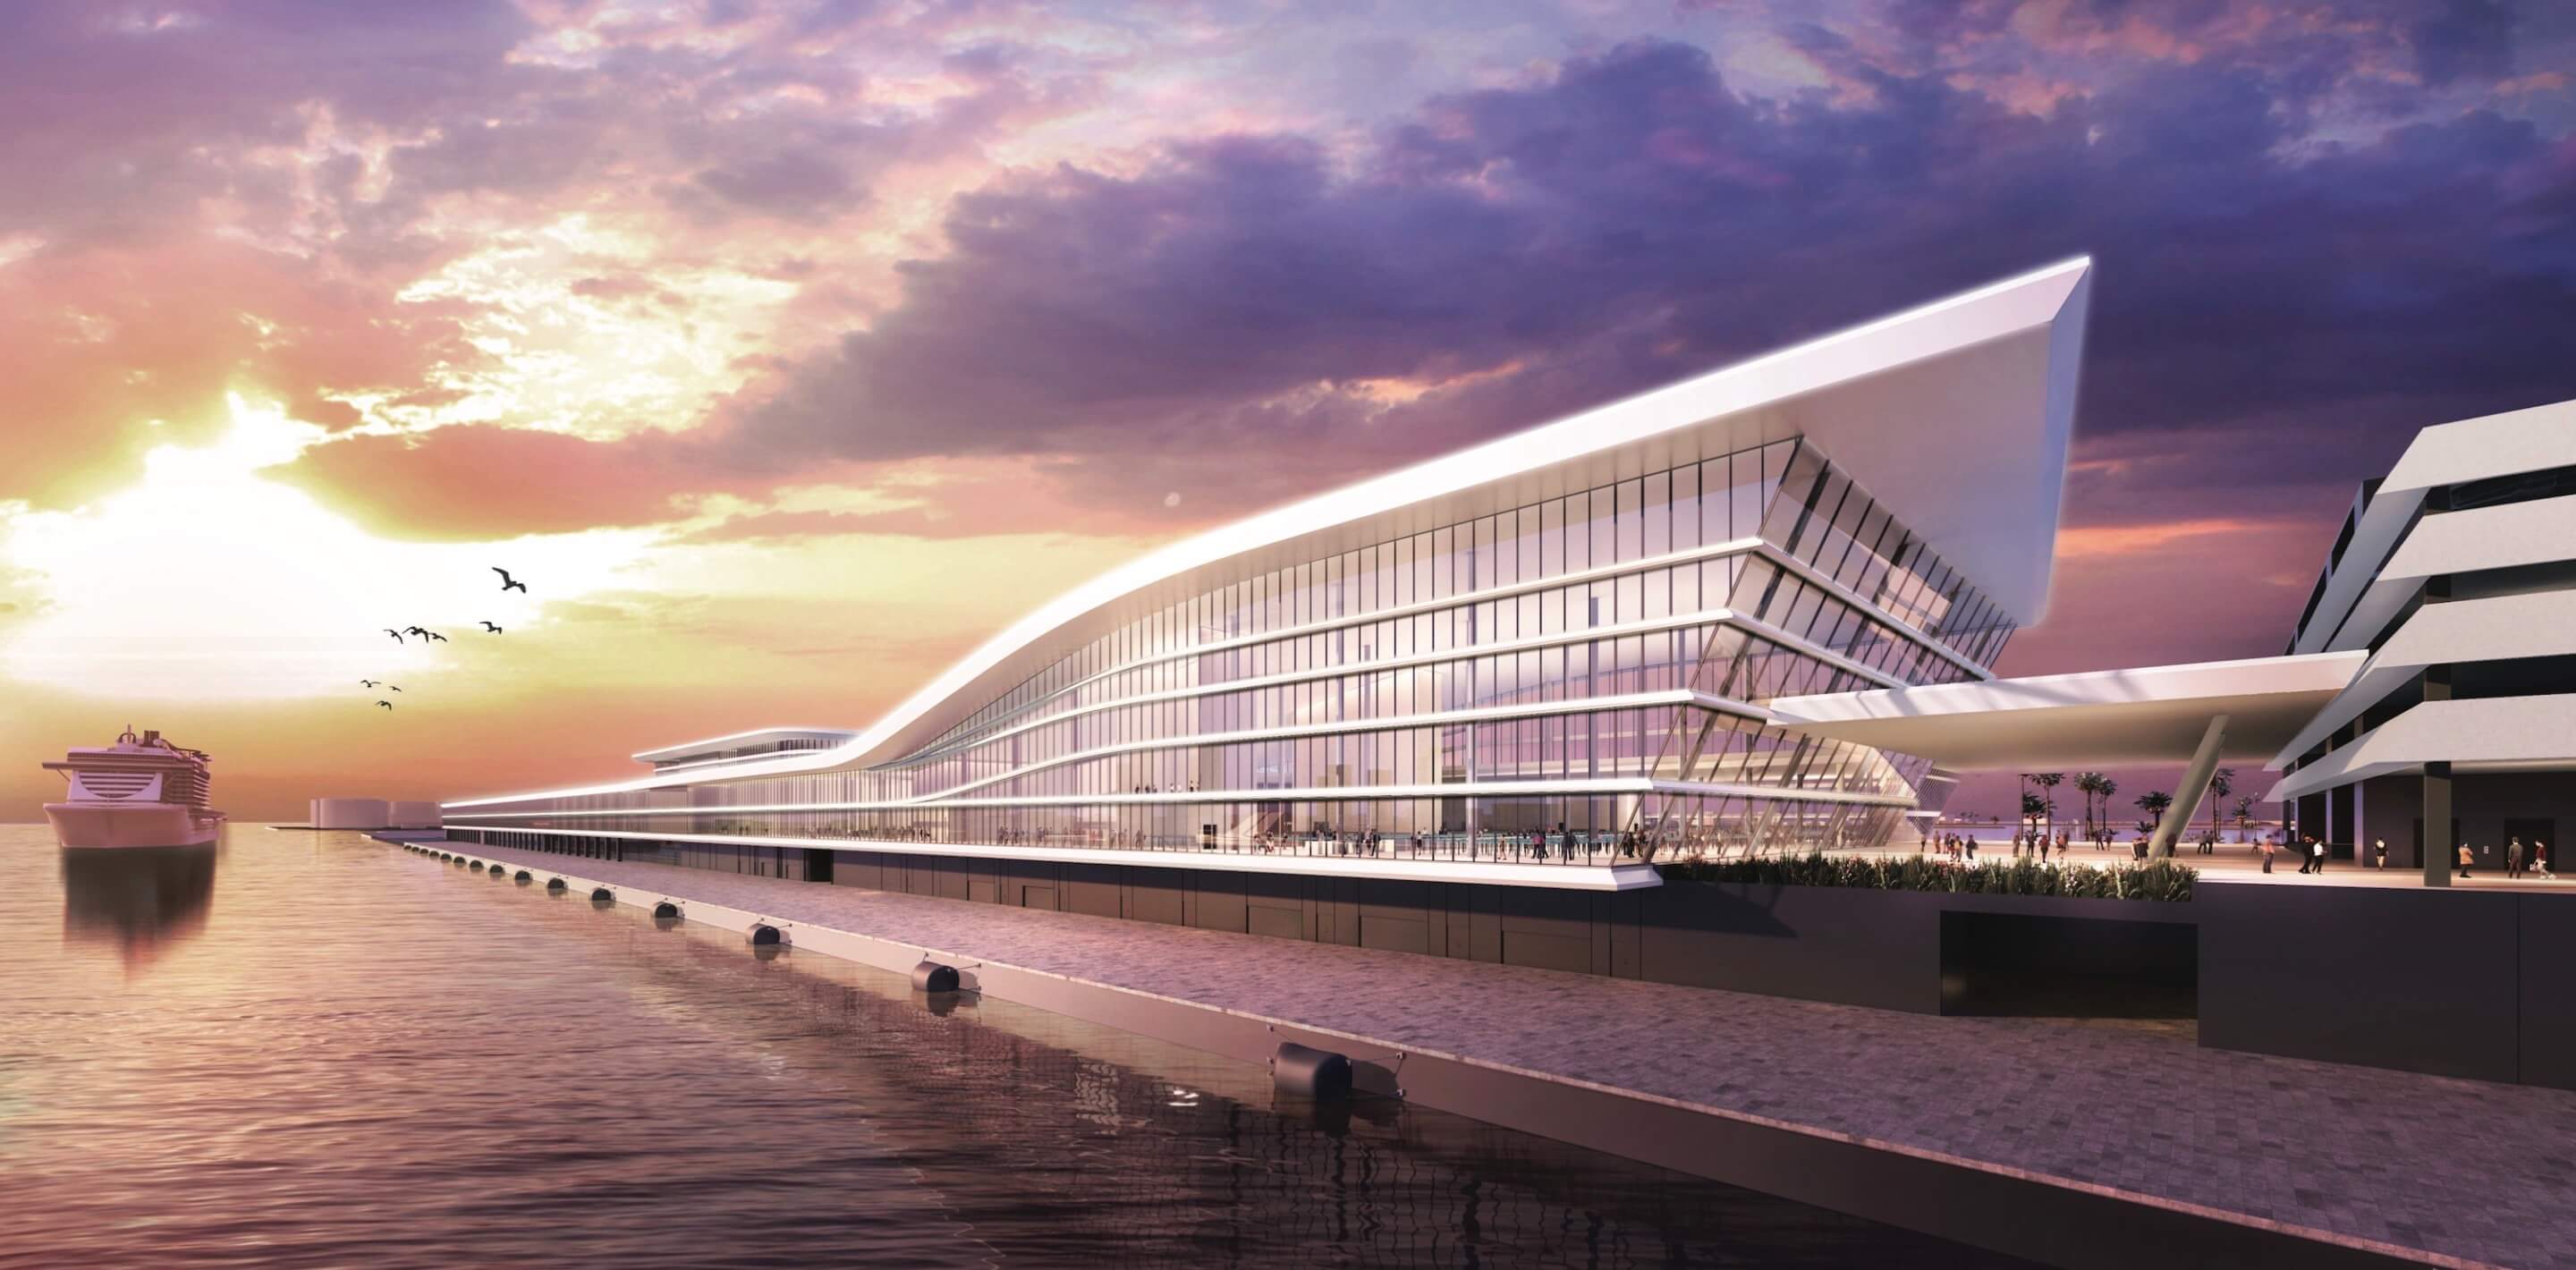 exterior rendering of a cruise ship terminal as seen from the water